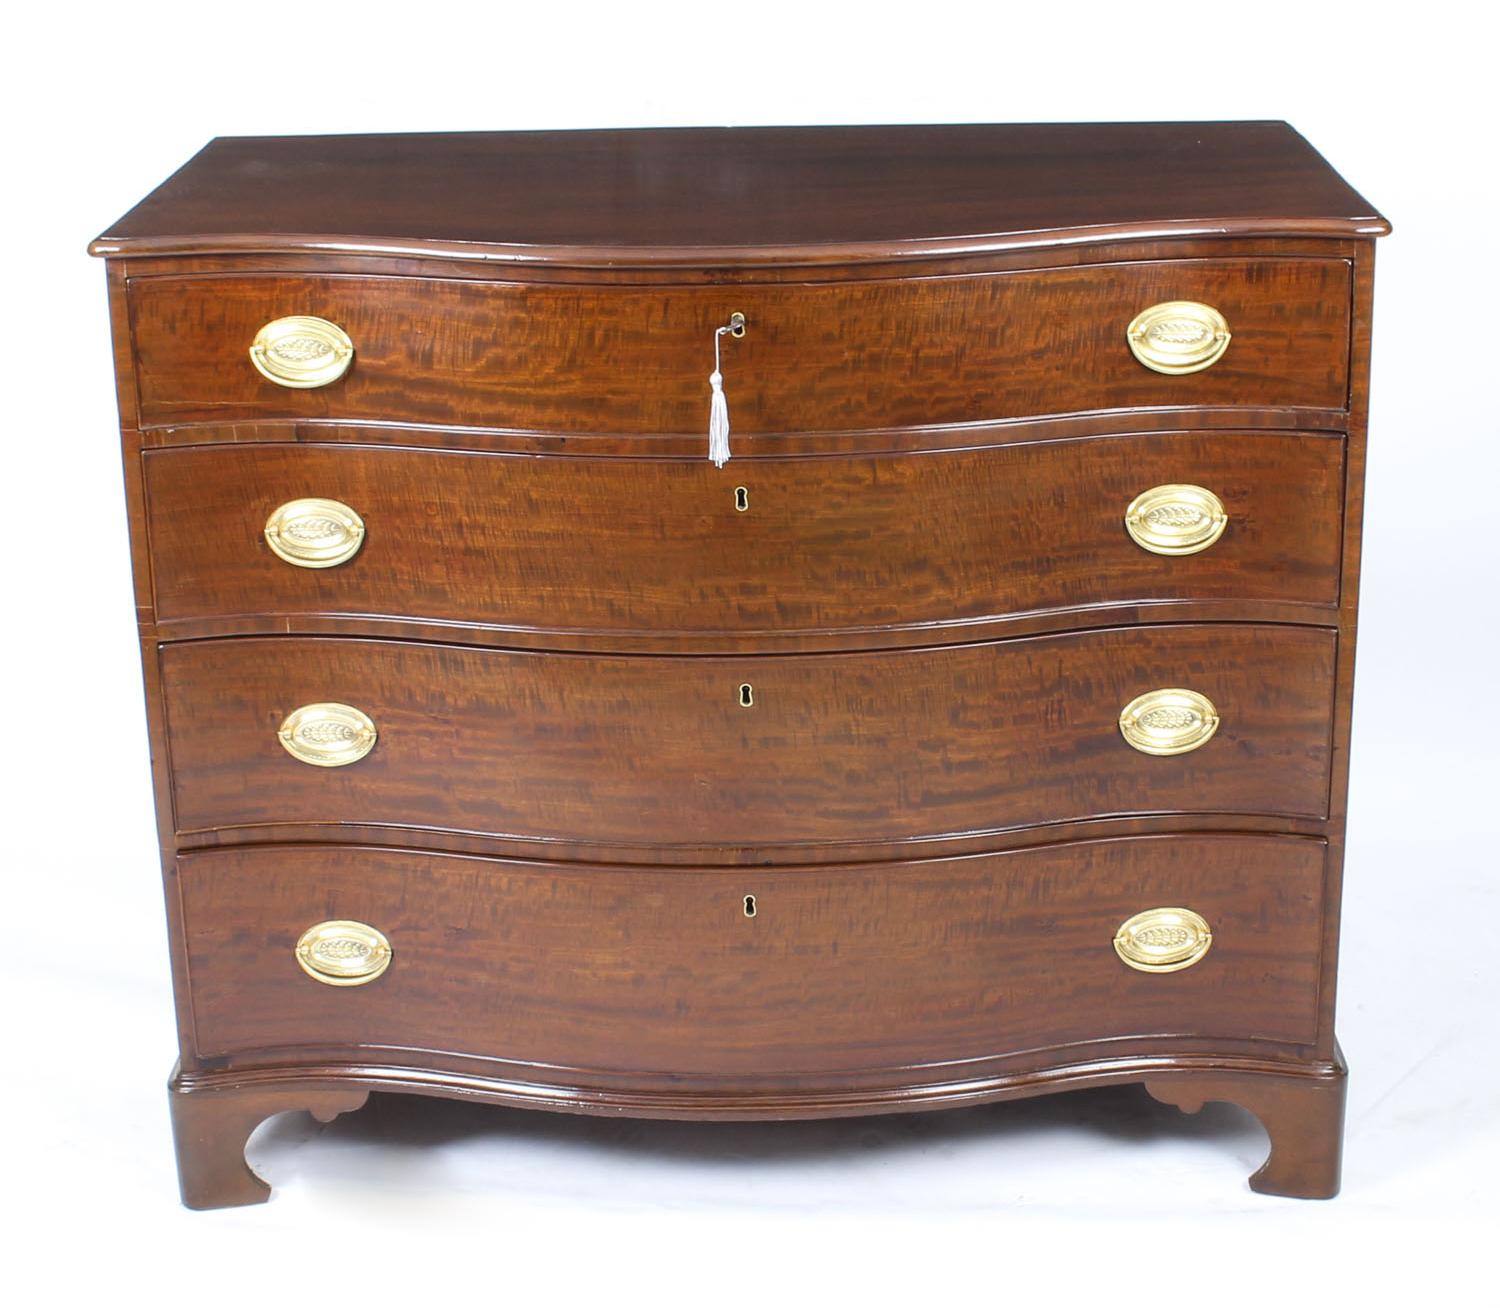 This is beautifully crafted antique George III flame mahogany serpentine fronted chest of drawers, circa 1780 in date.
 
The curvaceous serpentine chest is made from the finest quality flame mahogany. The top features a moulded edge, it has four